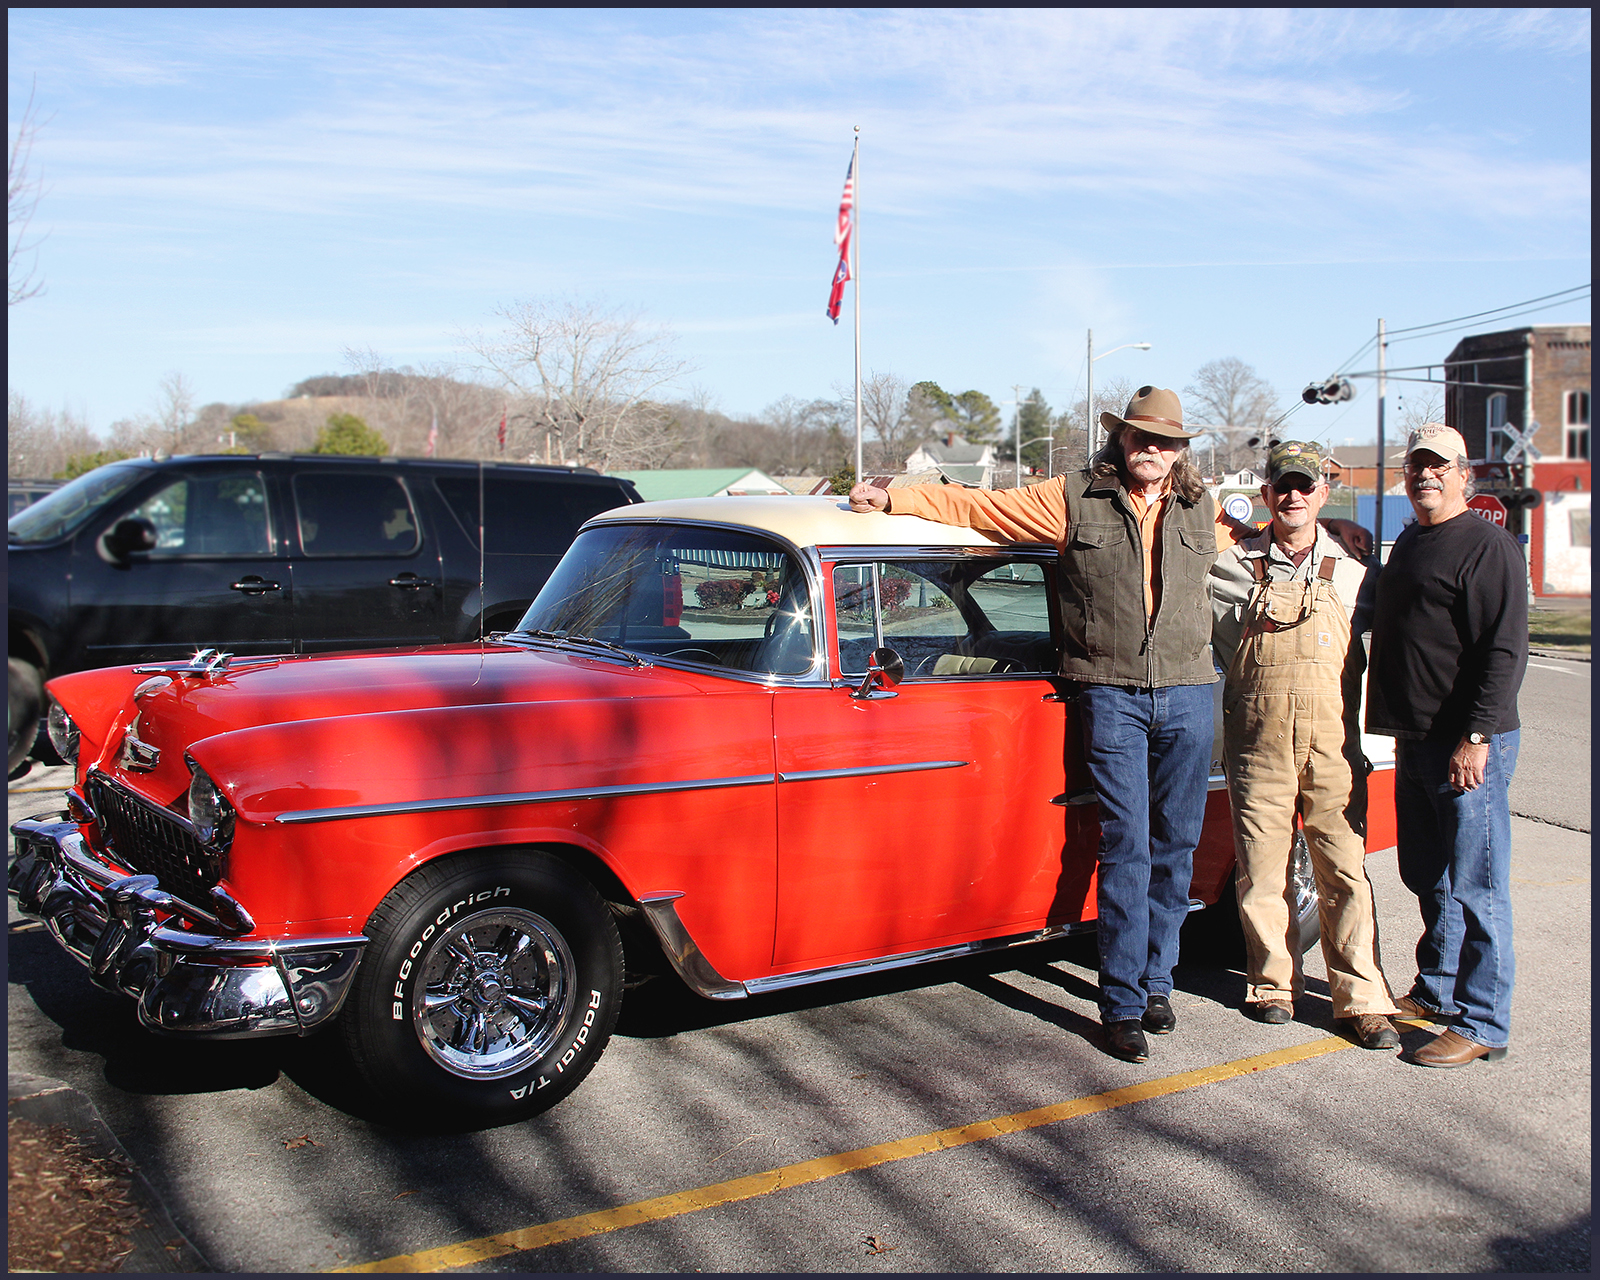 Colonel Littleton and two men standing next to a red 1955 Chevy car.